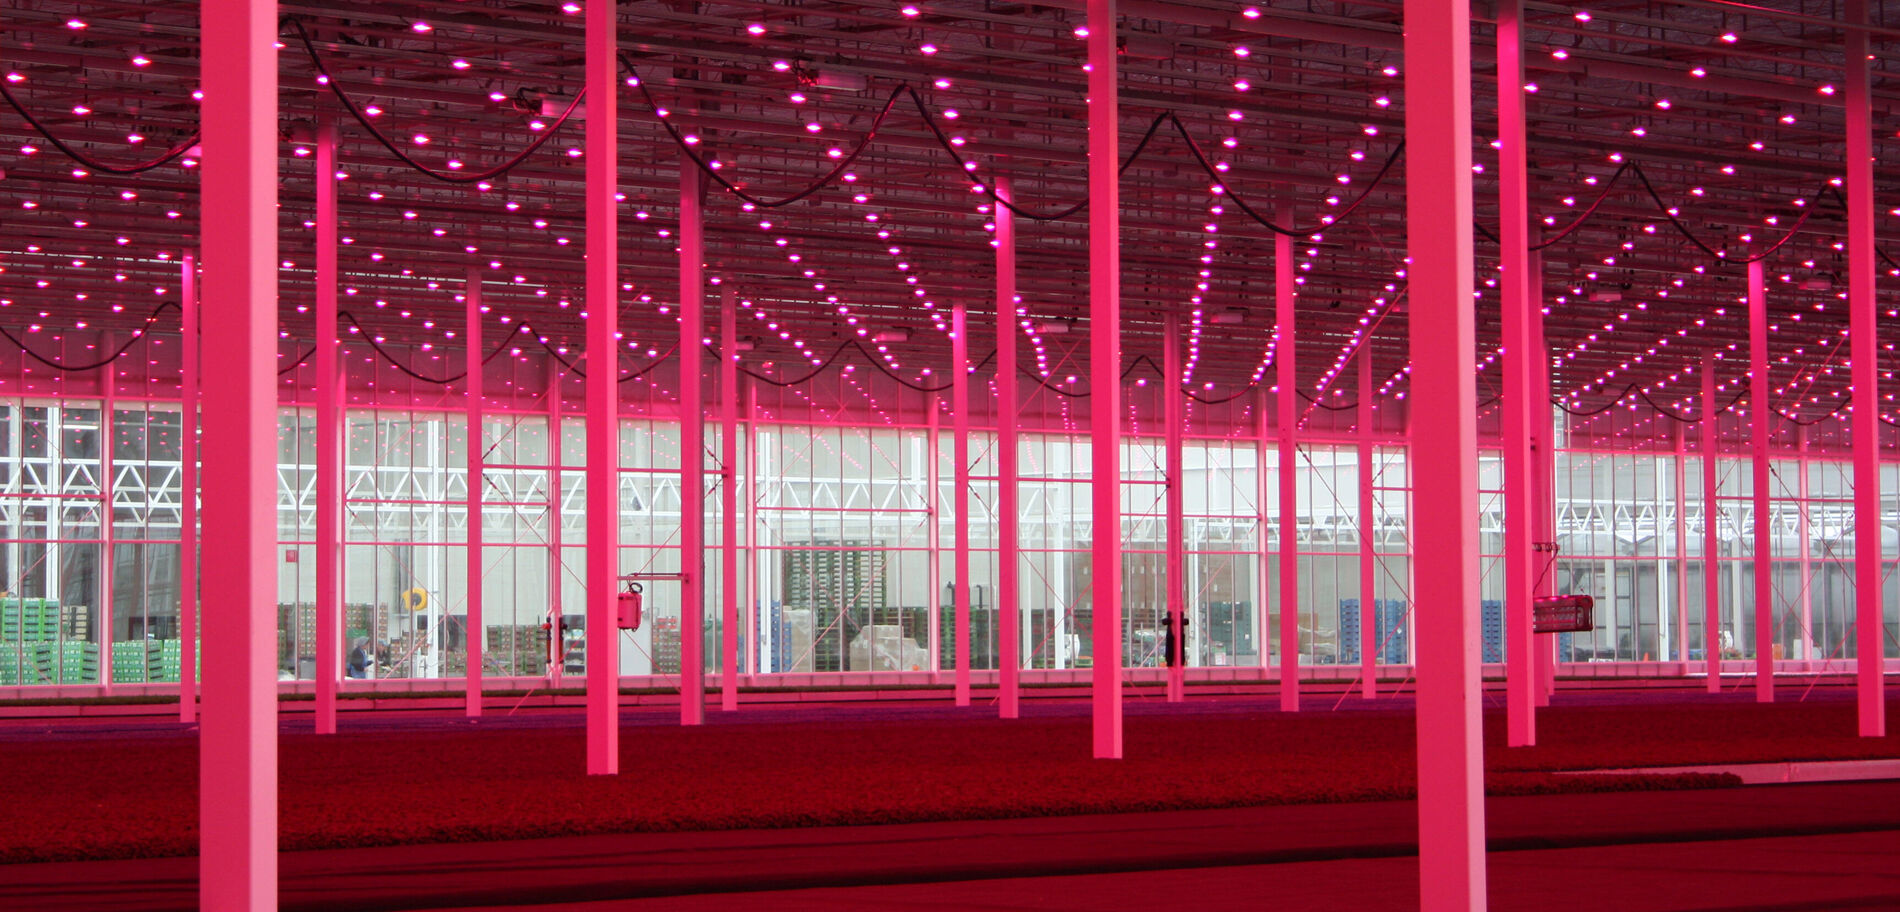 HortiDaily: Water cooled LED to cope with heat and humidity trapped under energy screens designed to limit light emission